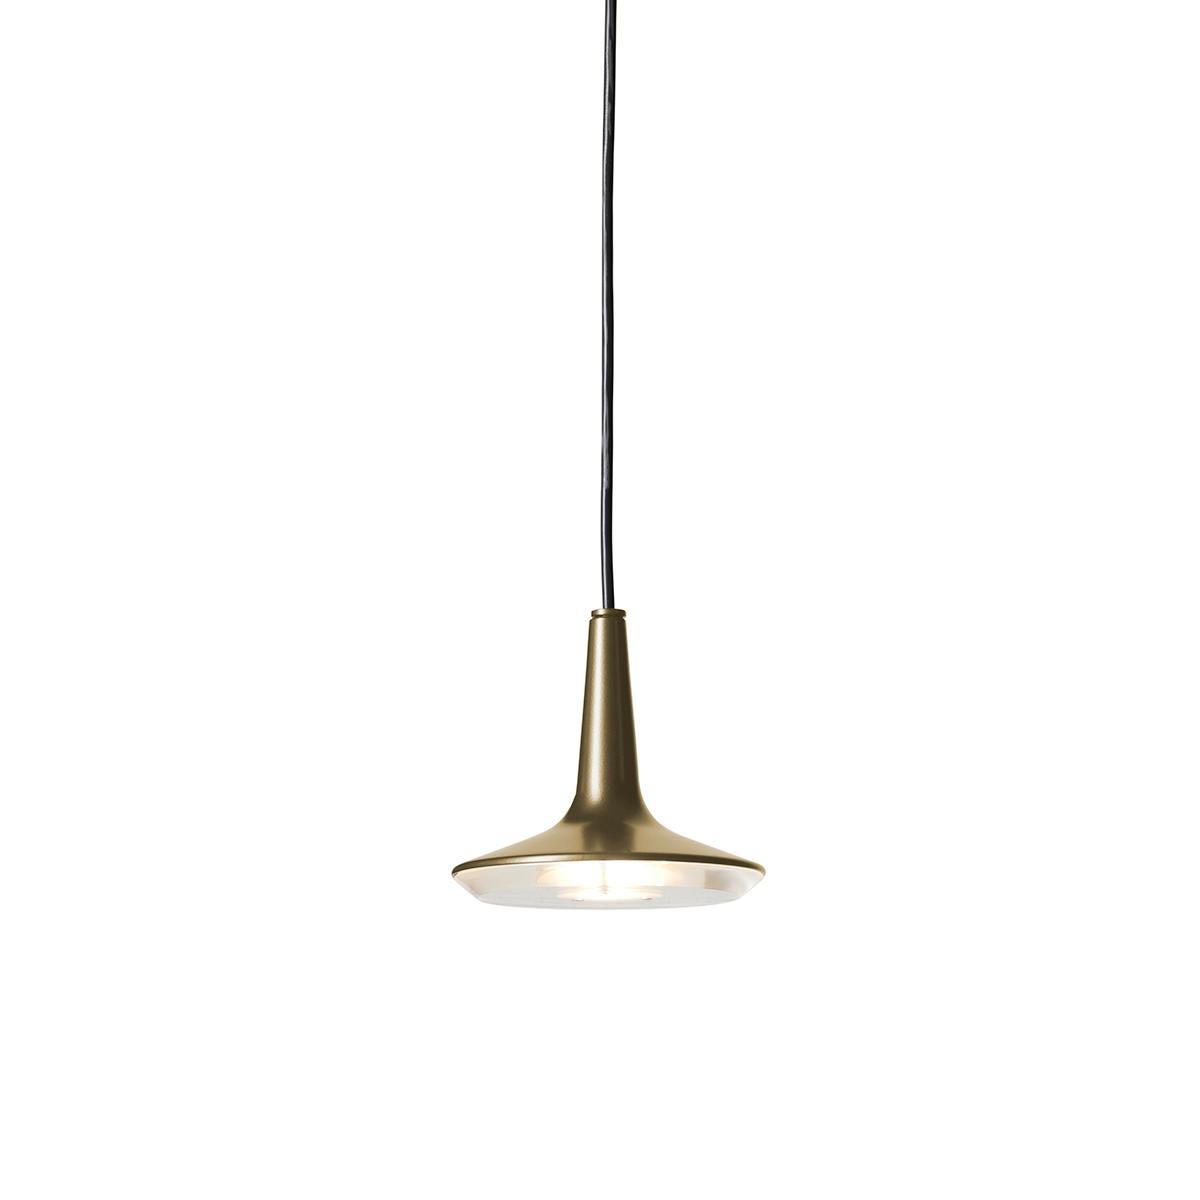 Suspension lamp 'Kin' 478 designed by Francesco Rota in 2013.
Suspension lamp giving direct and diffused light. Metal turned body lamp. PMMA transparent diffuser. Manufactured by Oluce, Italy.

A cast aluminium body with a Led core are the